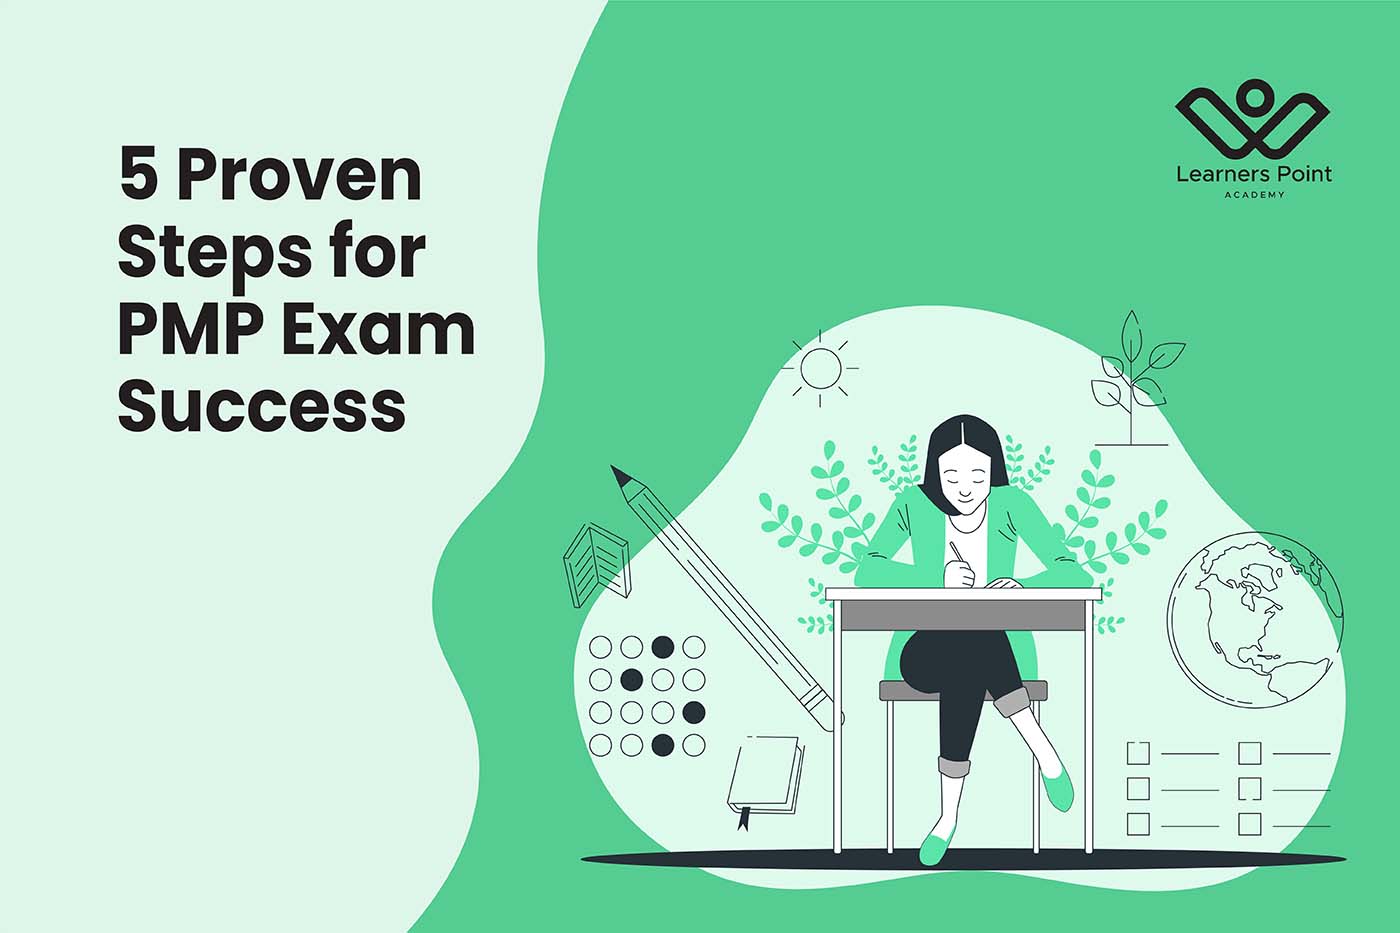 5 Proven Steps for PMP Exam Success